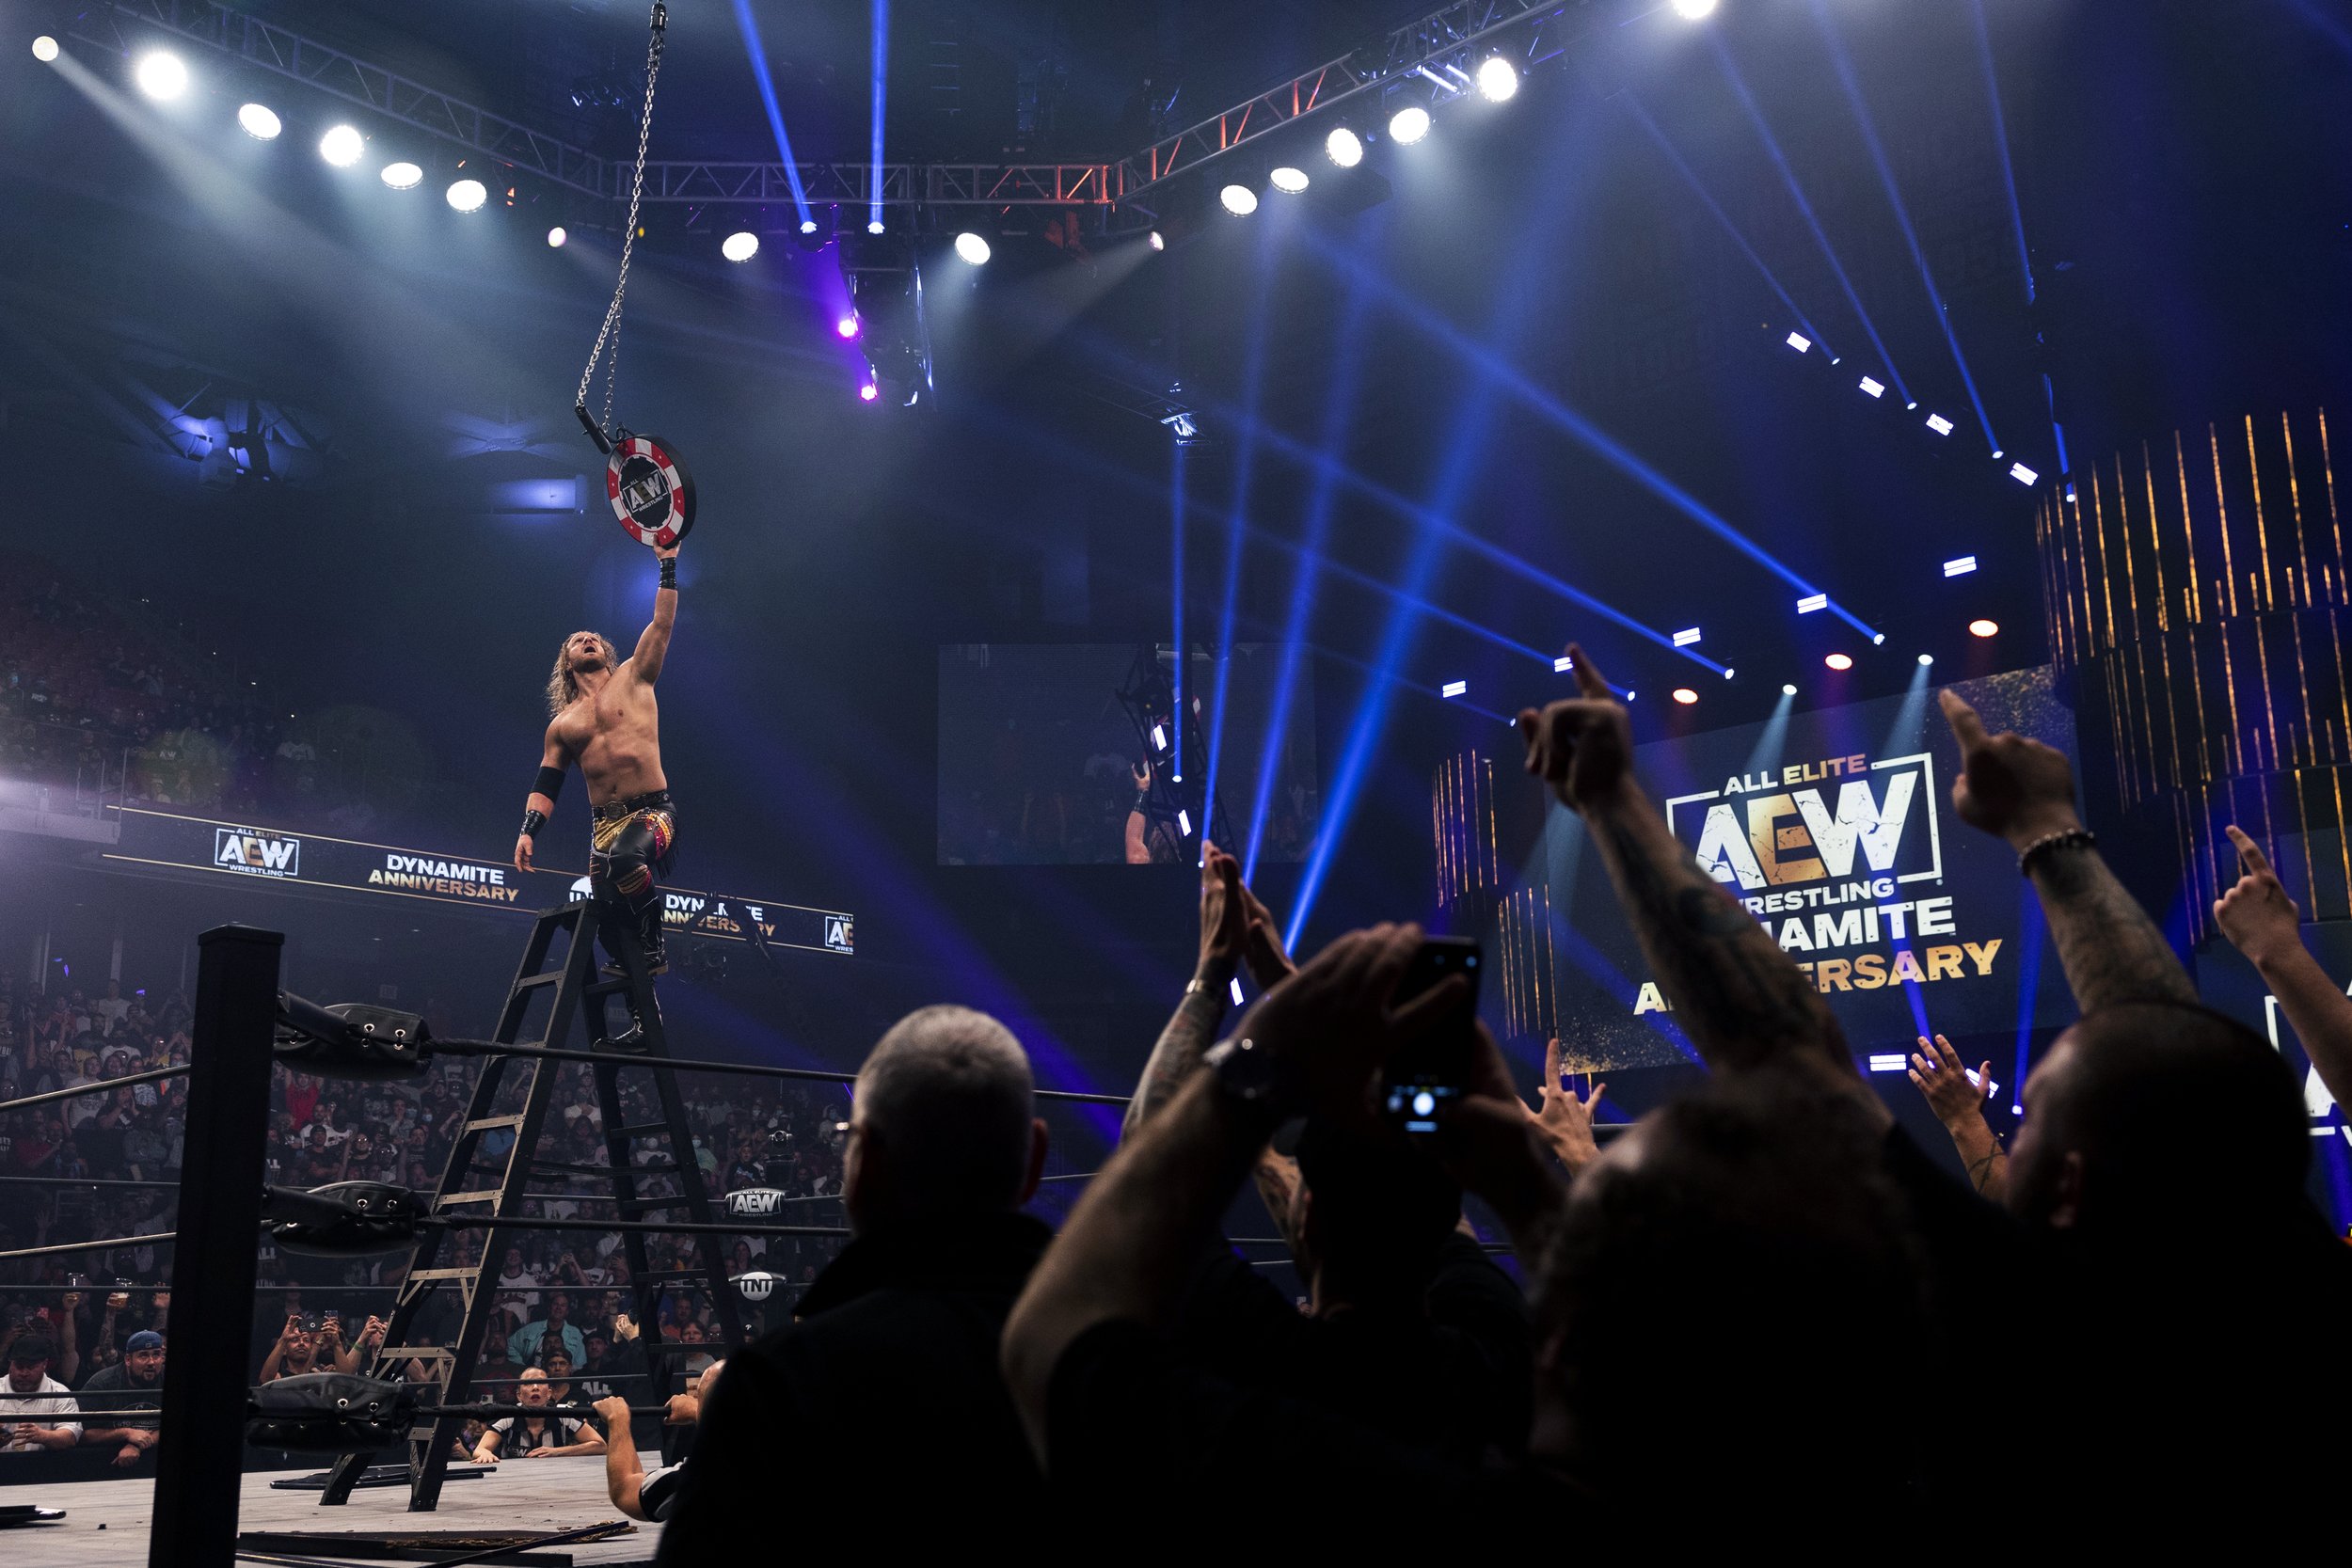  Adam Page claims victory in the Casino Ladder Match at the AEW Dynamite show in Philadelphia on October 6, 2021. (On assignment for Washington Post) 